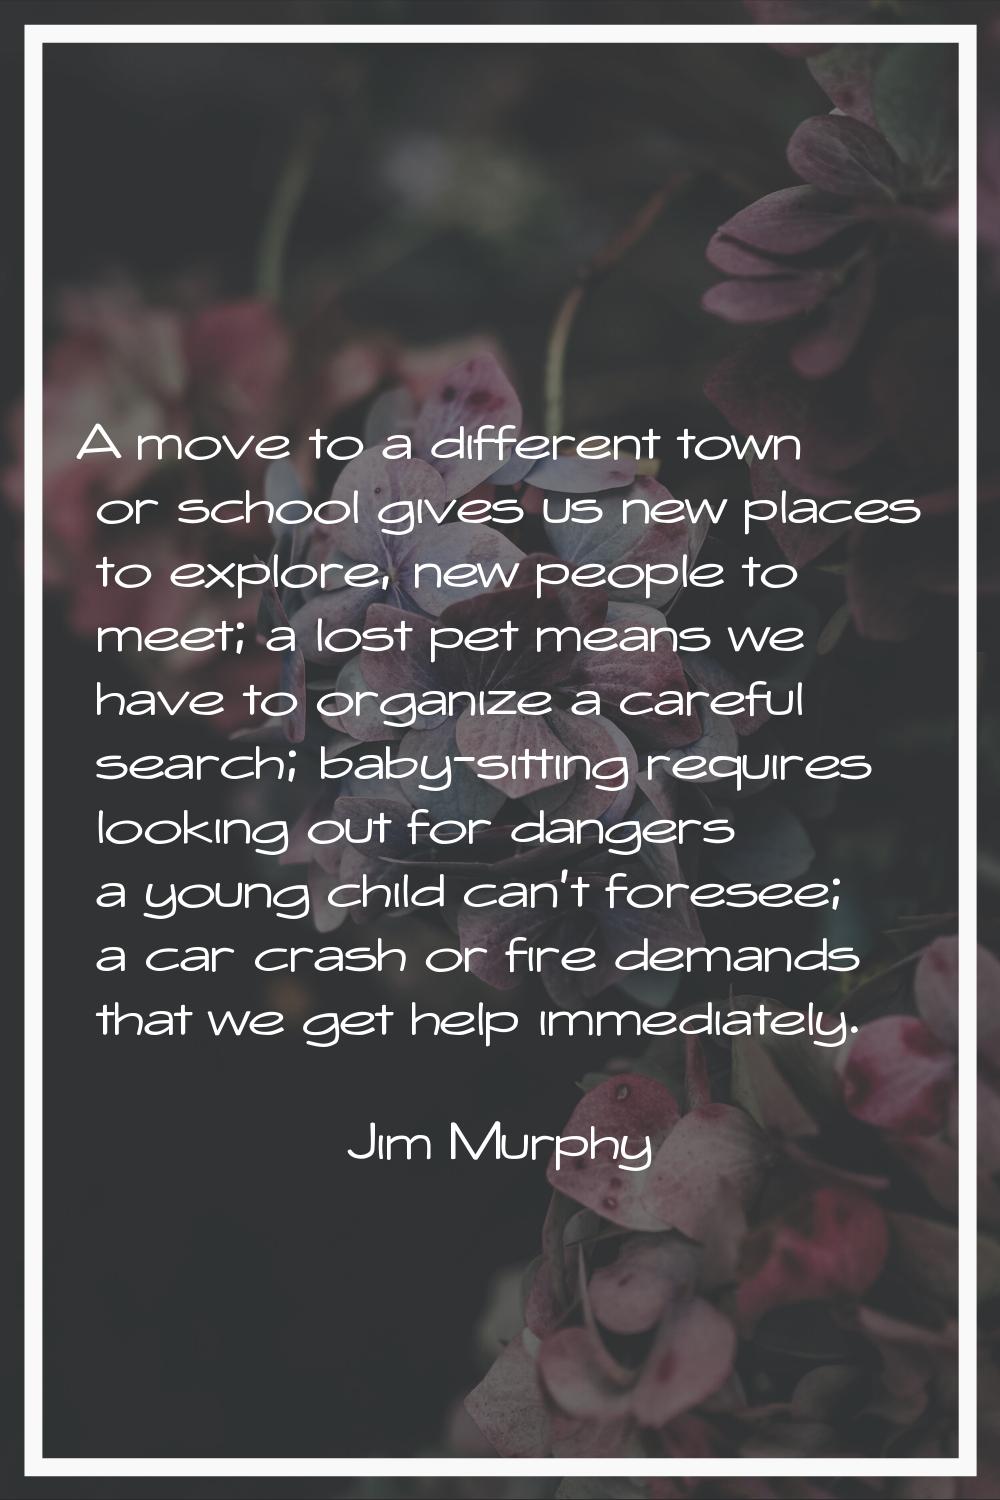 A move to a different town or school gives us new places to explore, new people to meet; a lost pet